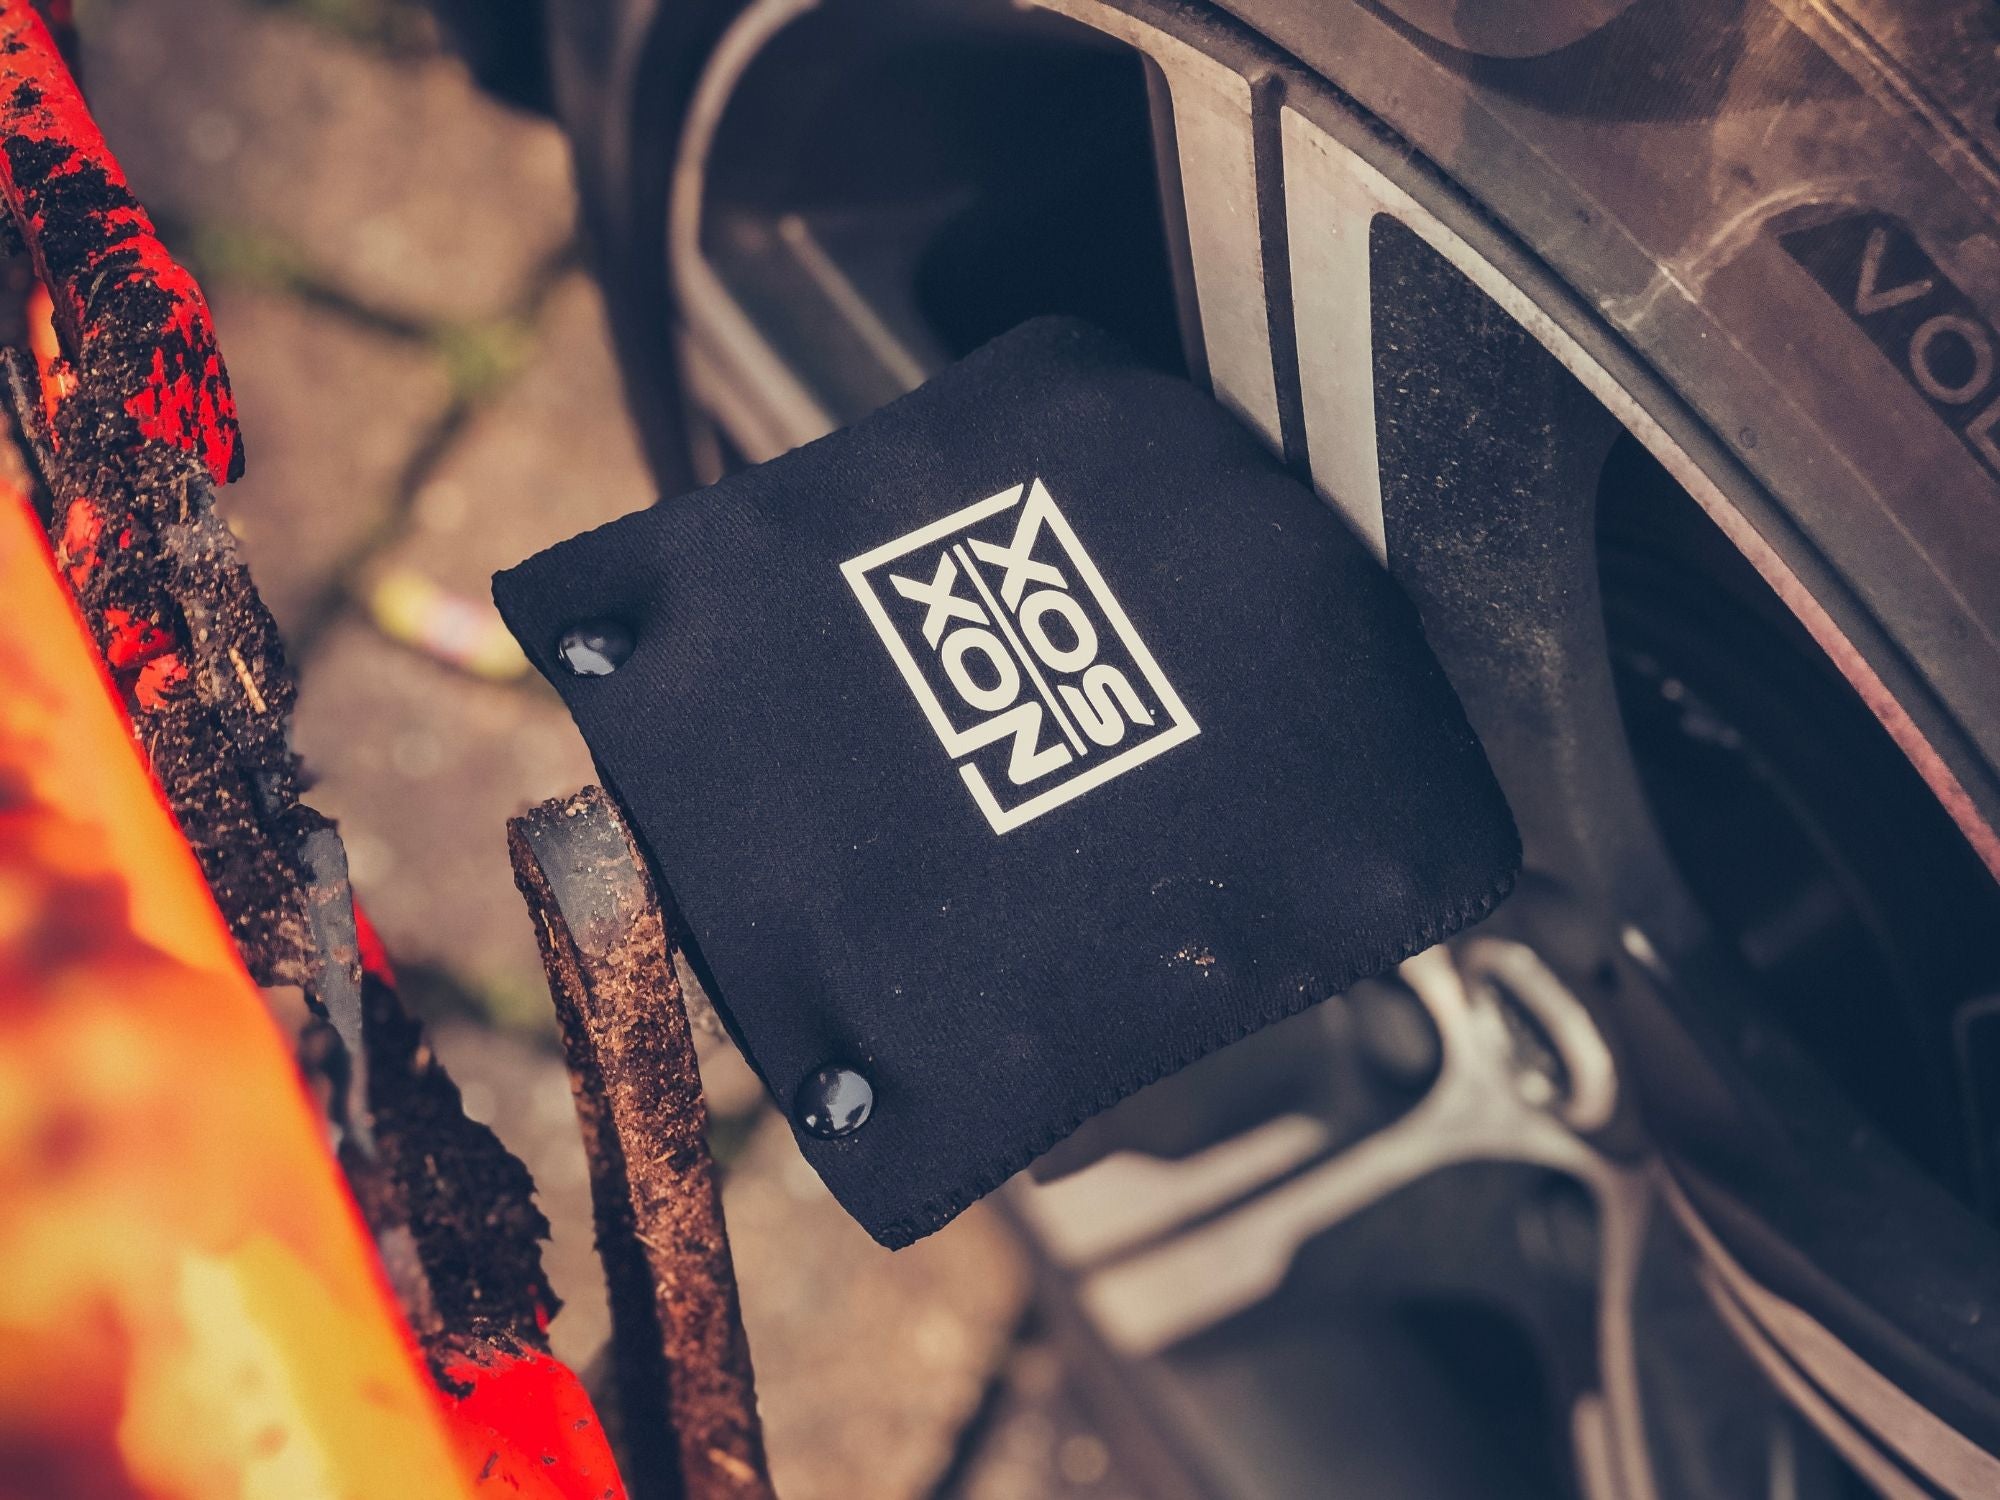 Nox Sox covered pedal leaning against a car wheel.